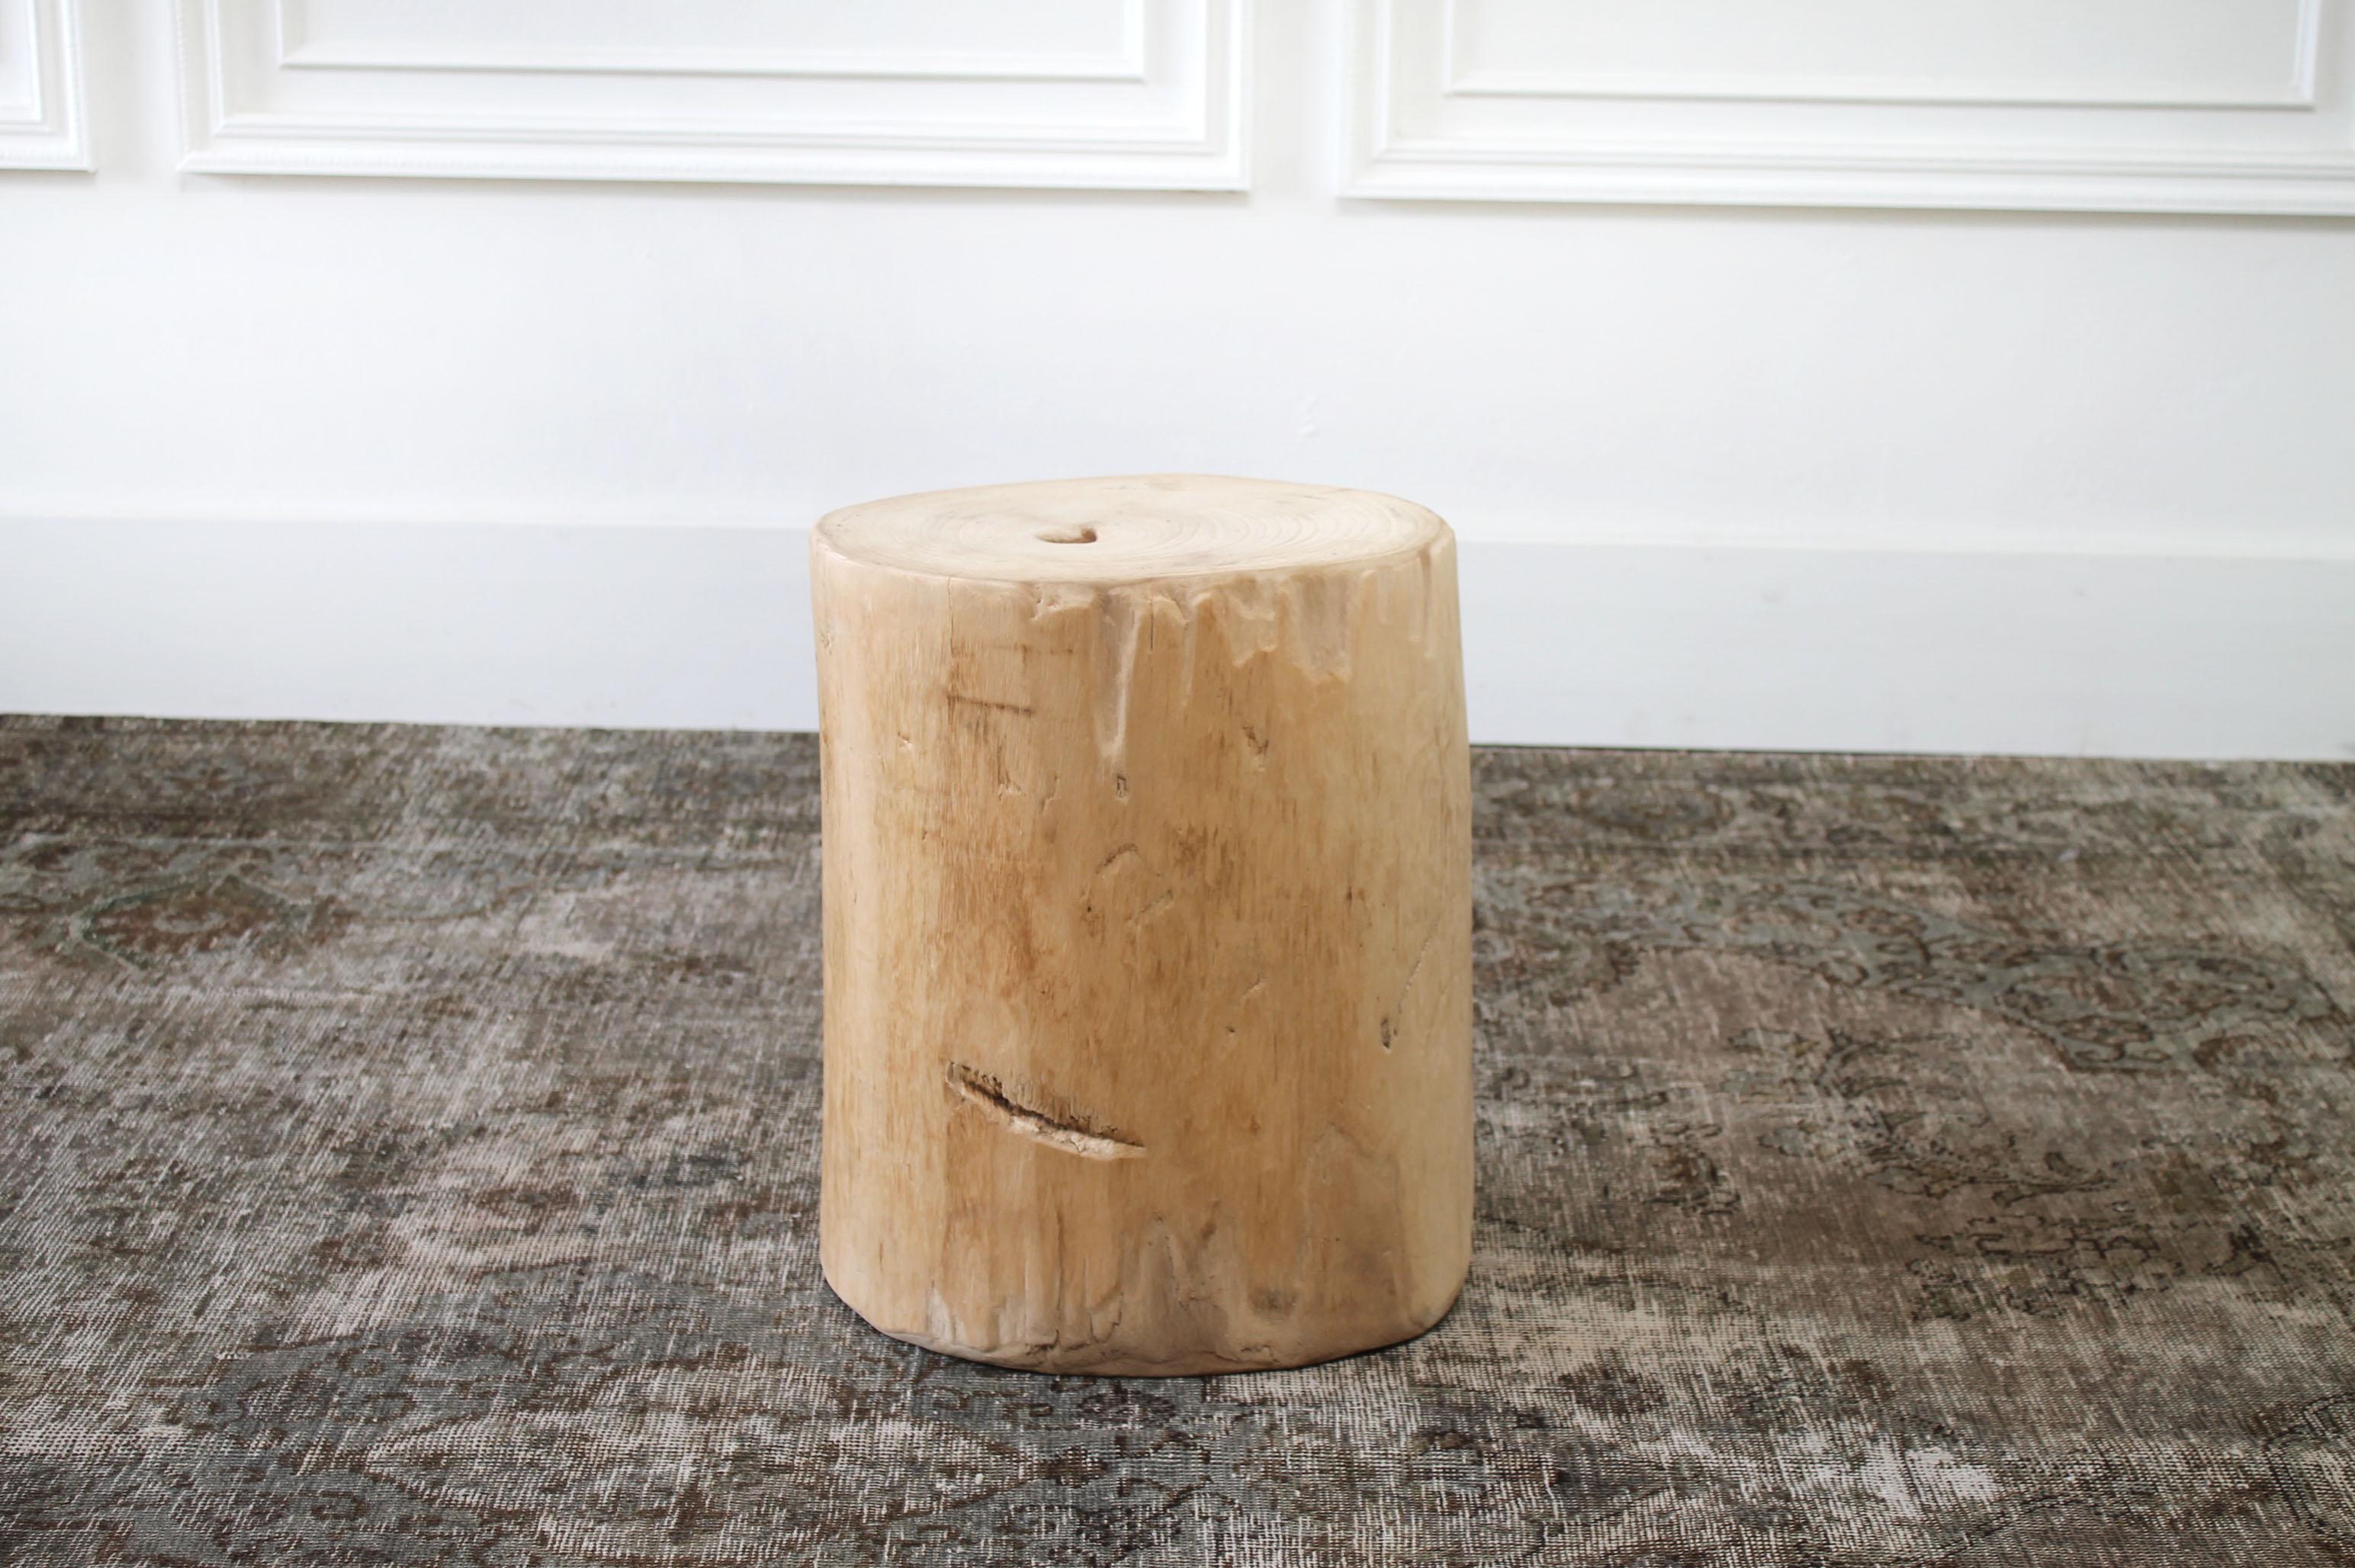 Birch wood tree stump base for side table or stool Beautiful smooth top with rustic sides, these are great for a side table or can be used for seating in any room. These are raw wood, they do not have any finish, or coloring. Measures: 14.5